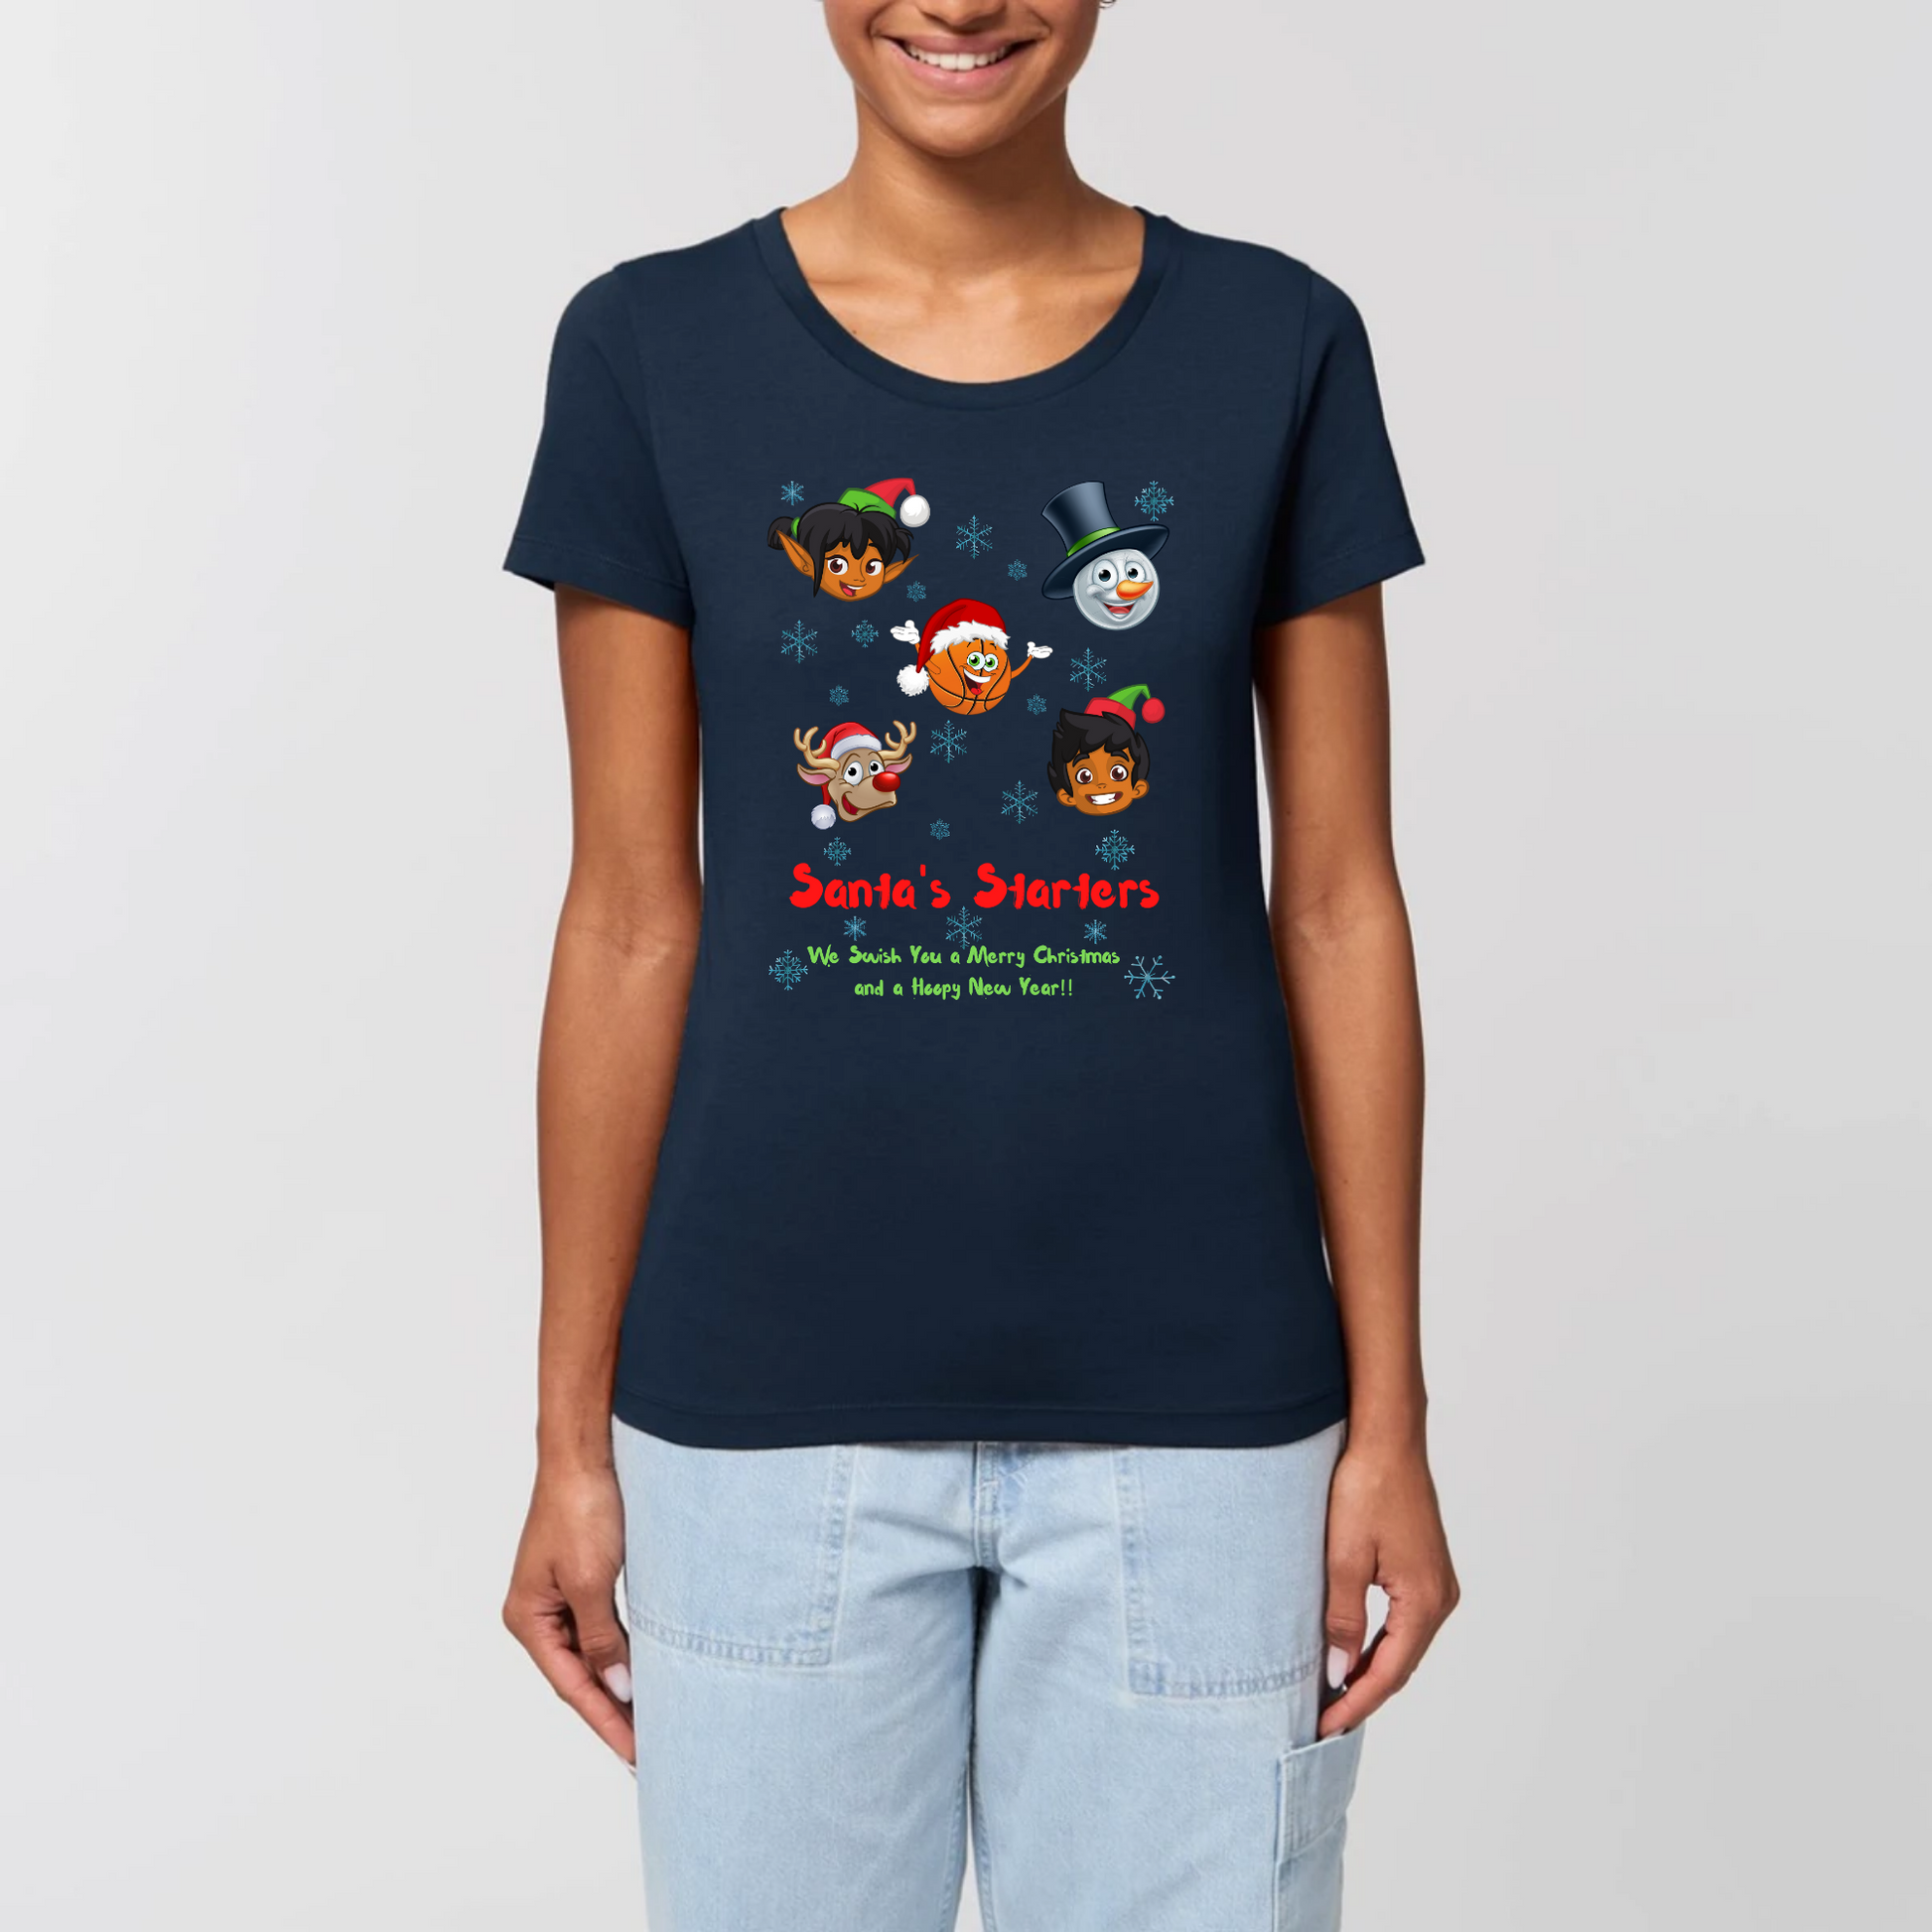 Model wearing a christmas t-shirt with a print design on front, The design has 5 cartoon character heads of 2 elves, a snowman, rundolf and a Basketball face with the heading Santa's starters and sub heading og We swish you a merry Christmas and a hoopy New Year. The t-shirt is Navy